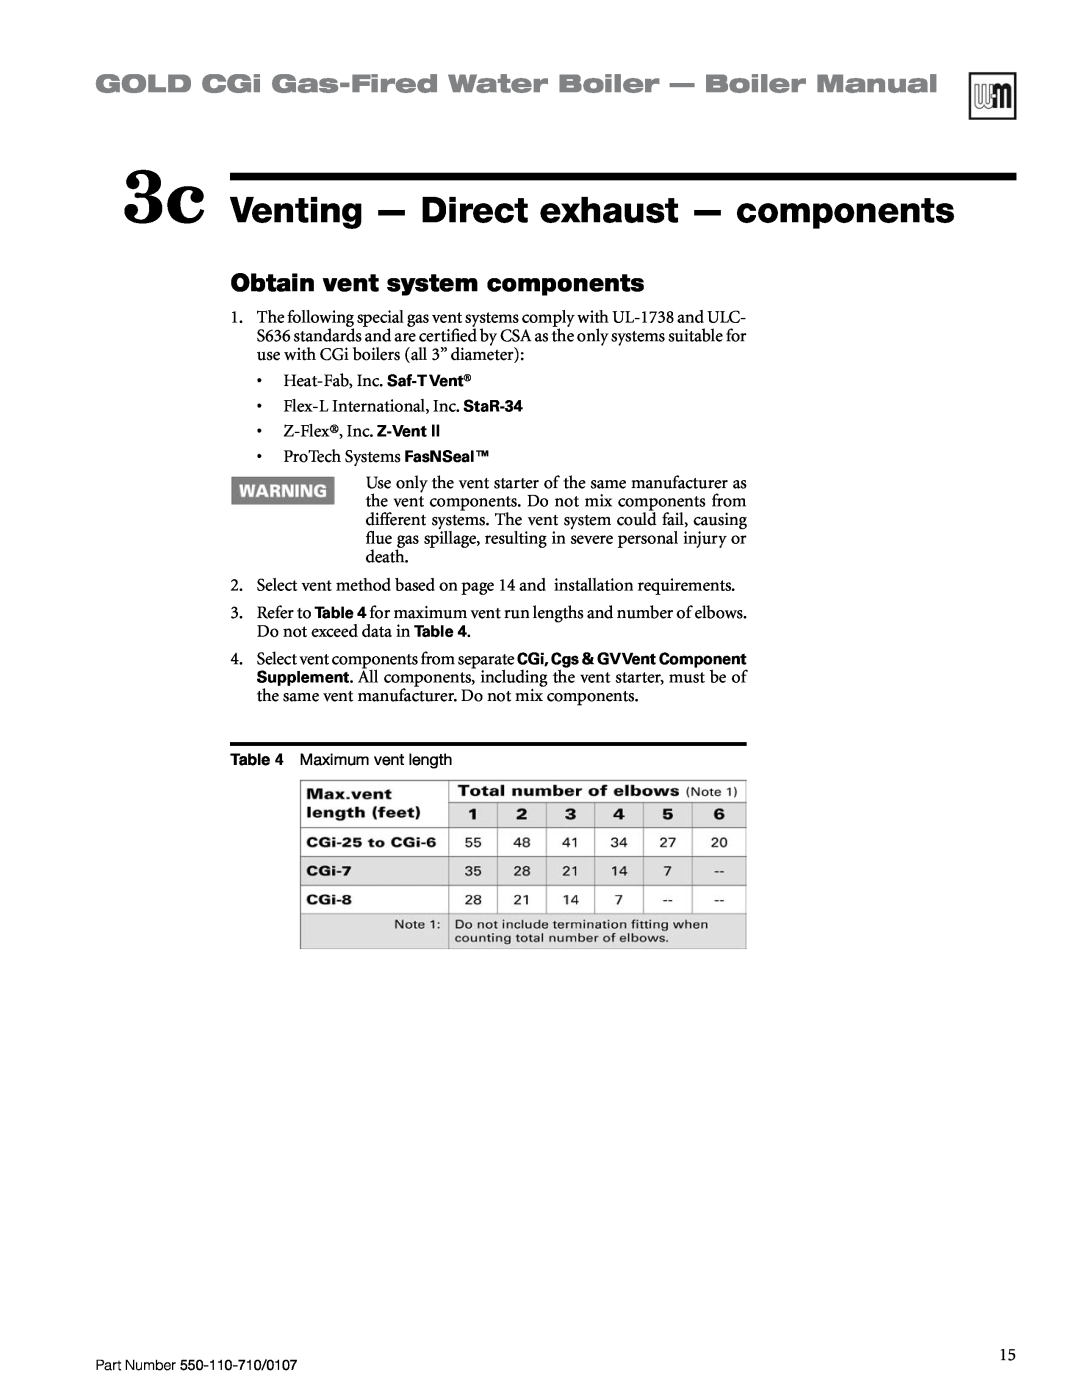 Weil-McLain Series 2 manual 3c Venting — Direct exhaust — components, GOLD CGi Gas-FiredWater Boiler — Boiler Manual 